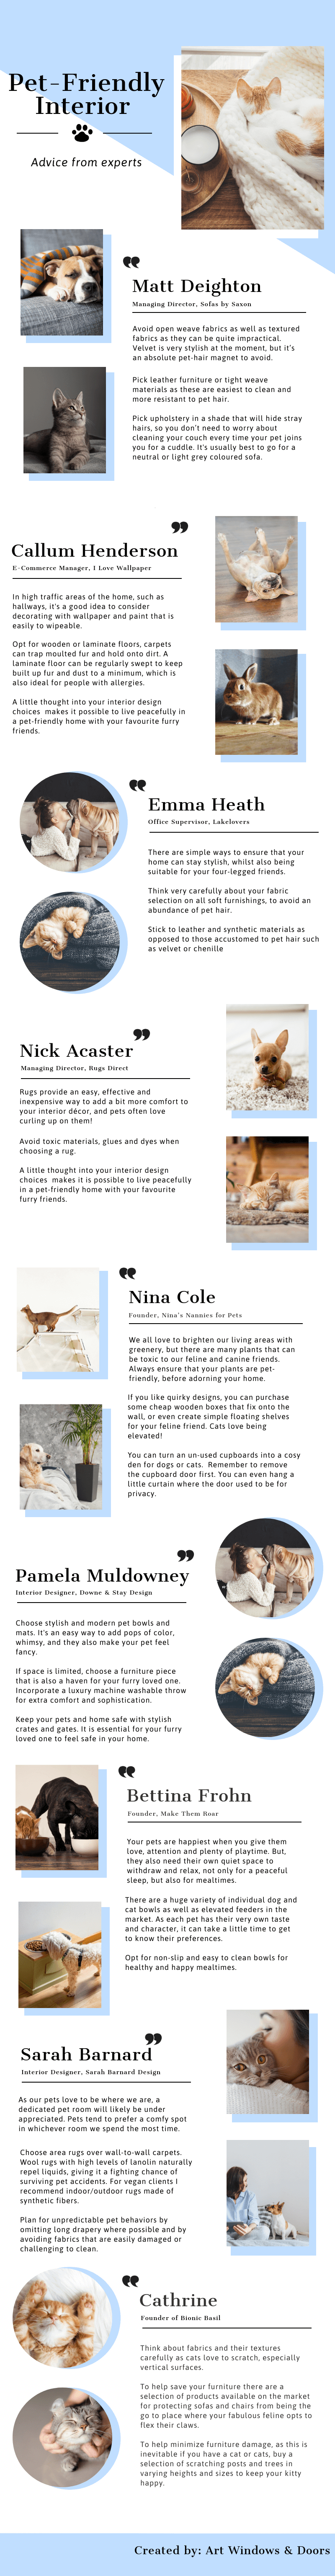 pet-friendly-interior-tips-infographic